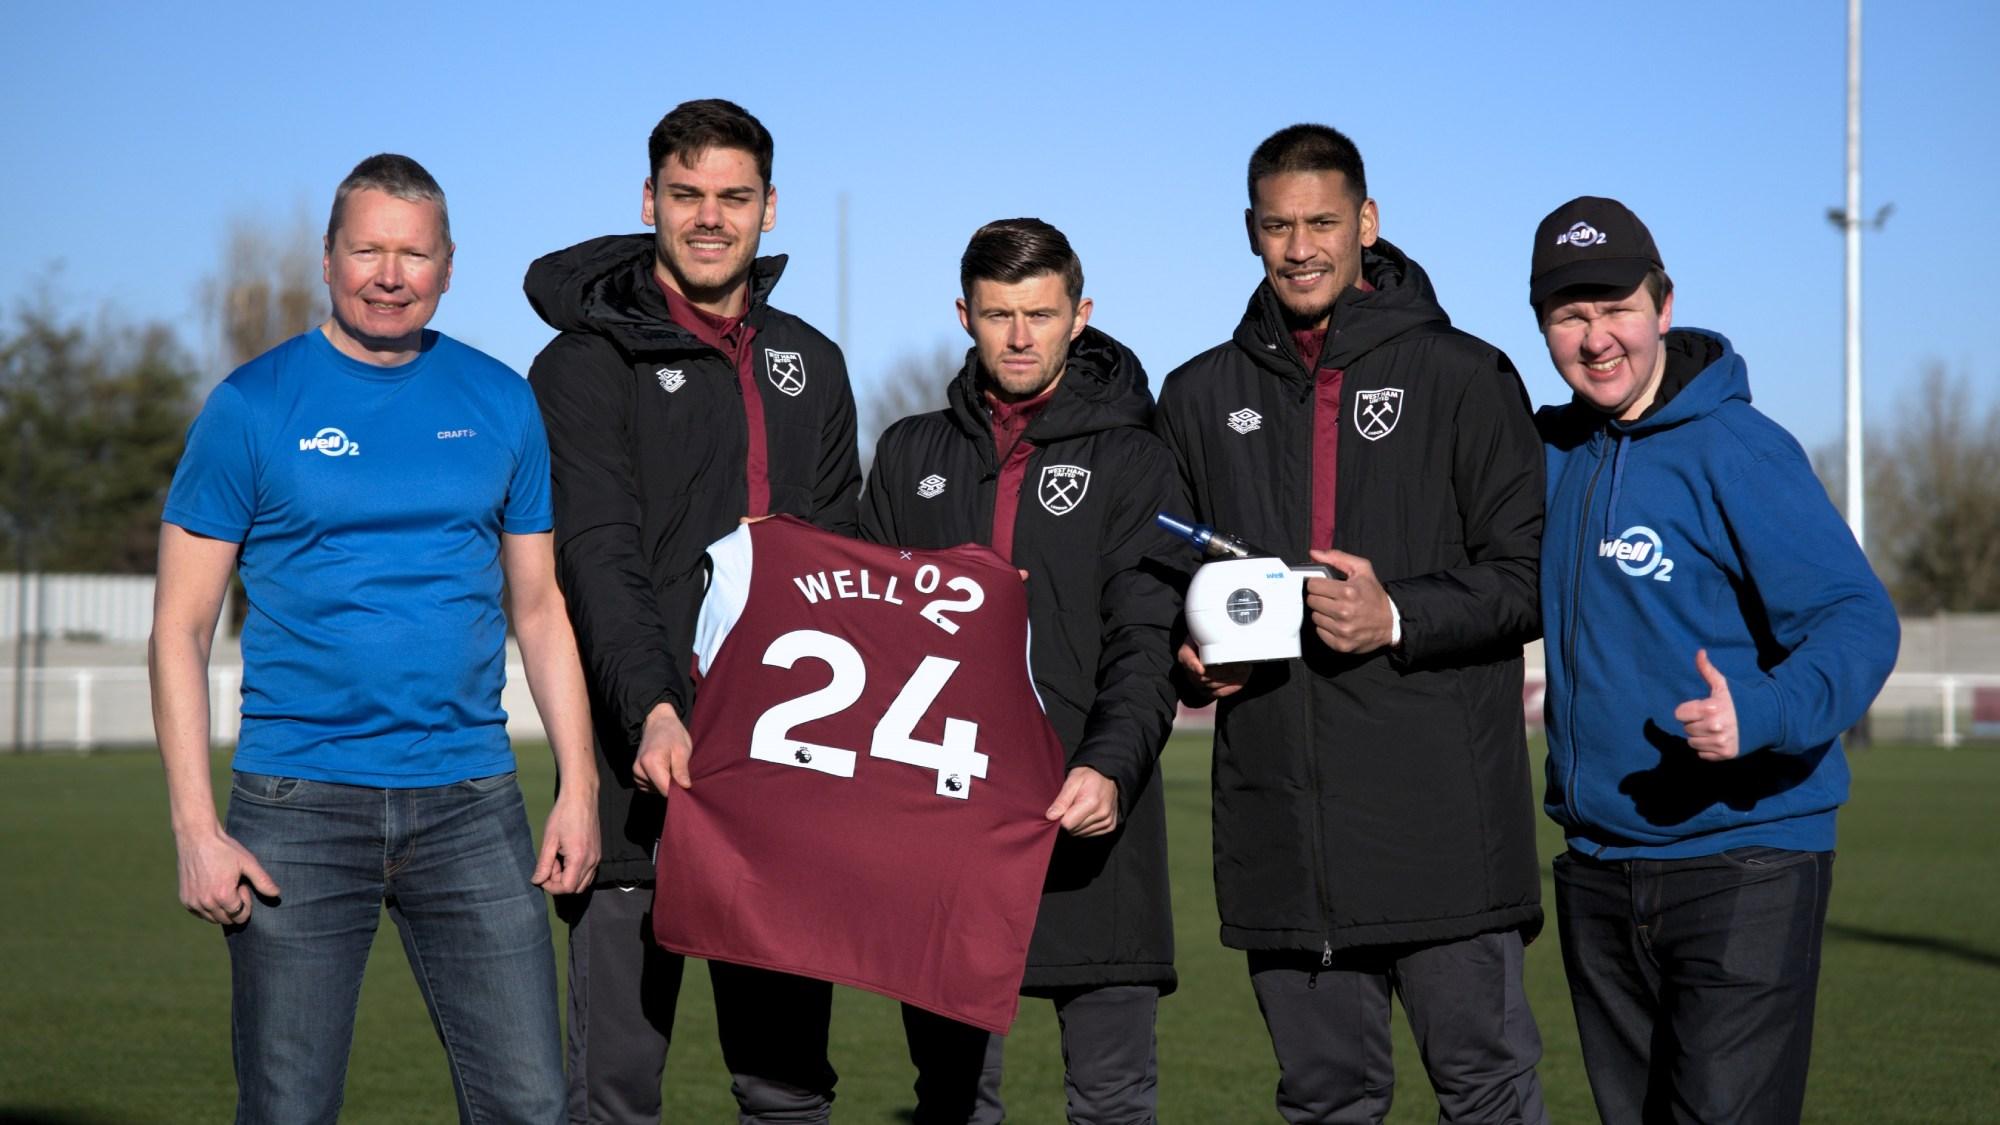 Sennheiser and West Ham improve performance with Finnish sports brands